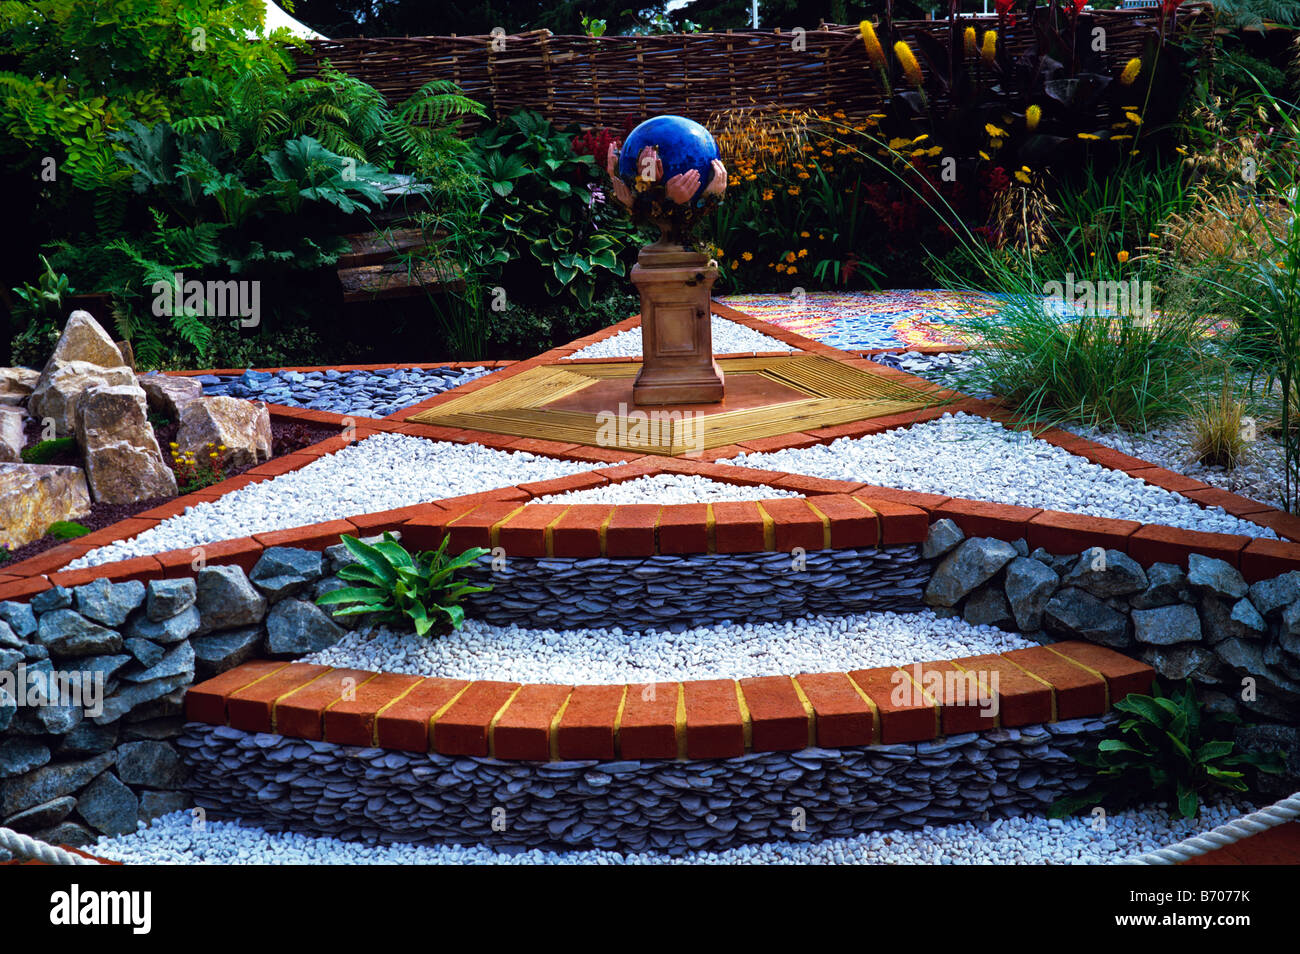 Show garden with star shaped terrace and globe sculpture Stock Photo